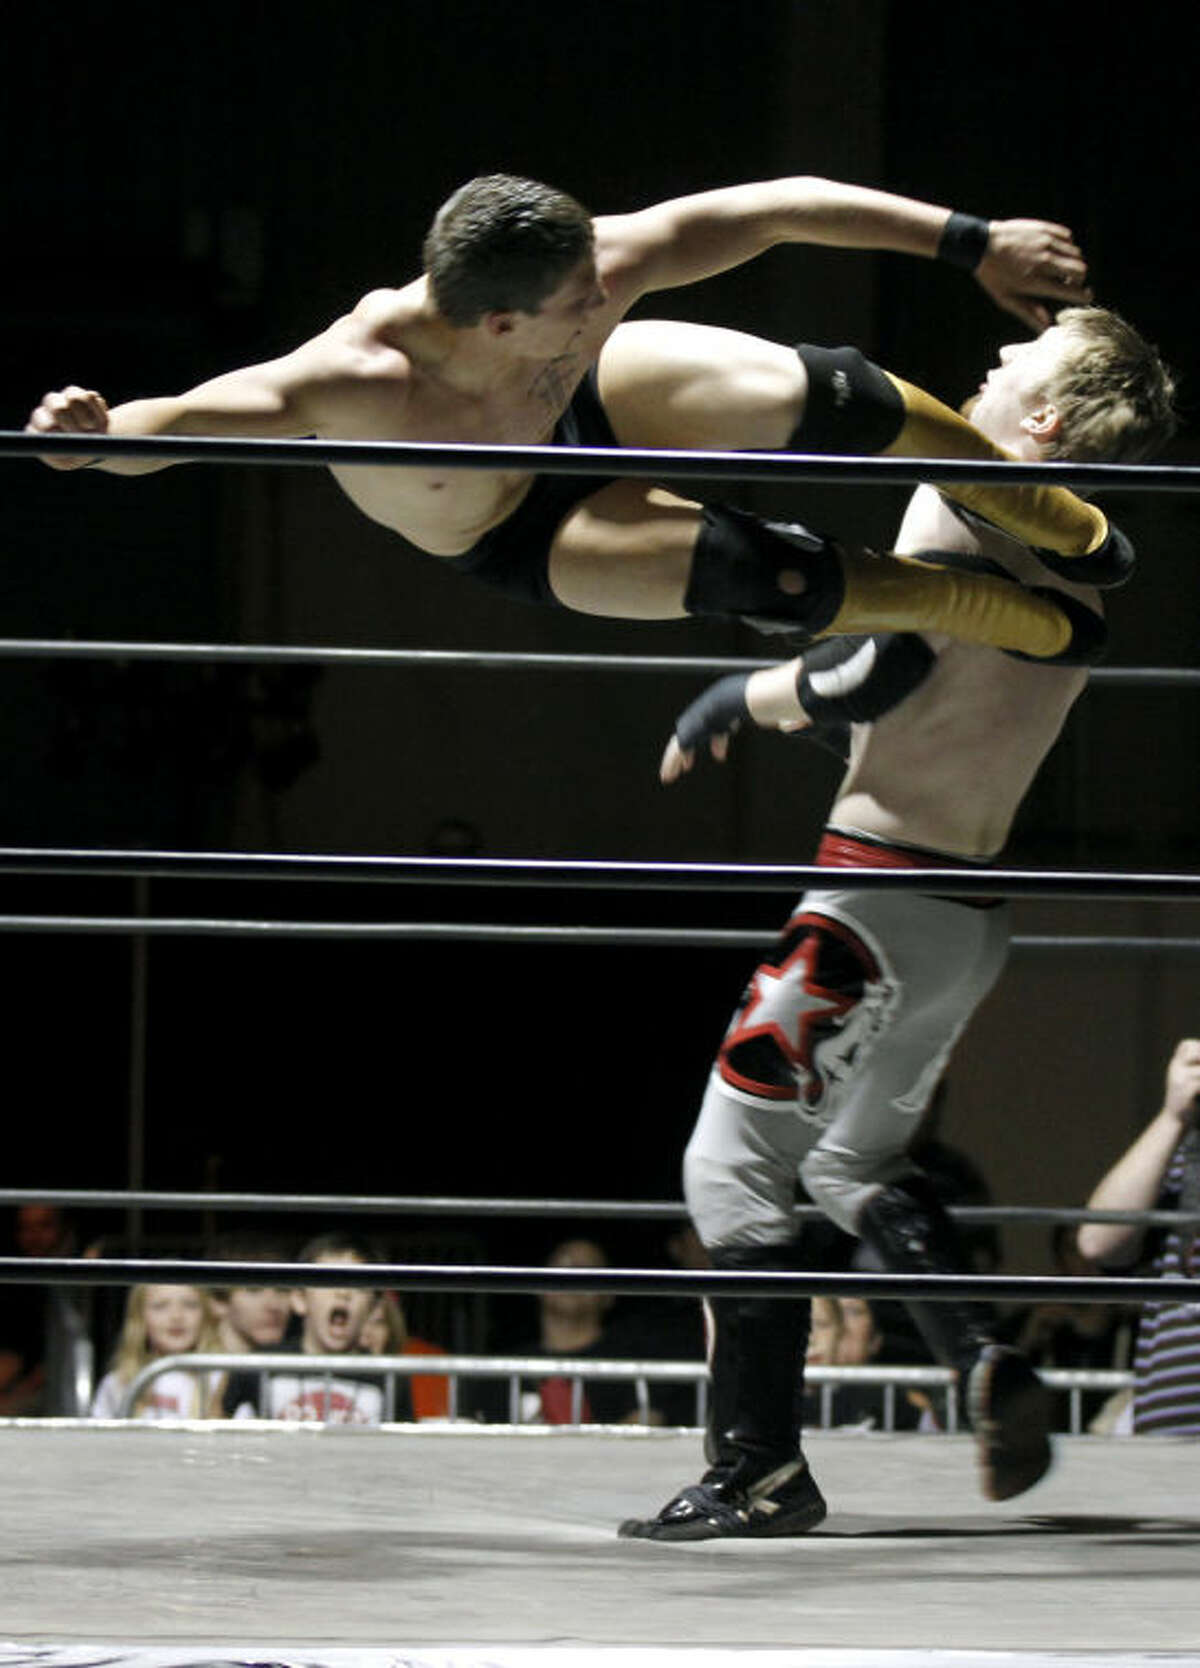 Midlander Aaron Harmes, aka "Cash Commodity," delivers a flying kick to opponent Ryan Justice during the "Breaking The Silence" wrestling event put on by Old School Wrestling of Odessa to raise awareness about bullying and teenage suicide. James Durbin/Reporter-Telegram